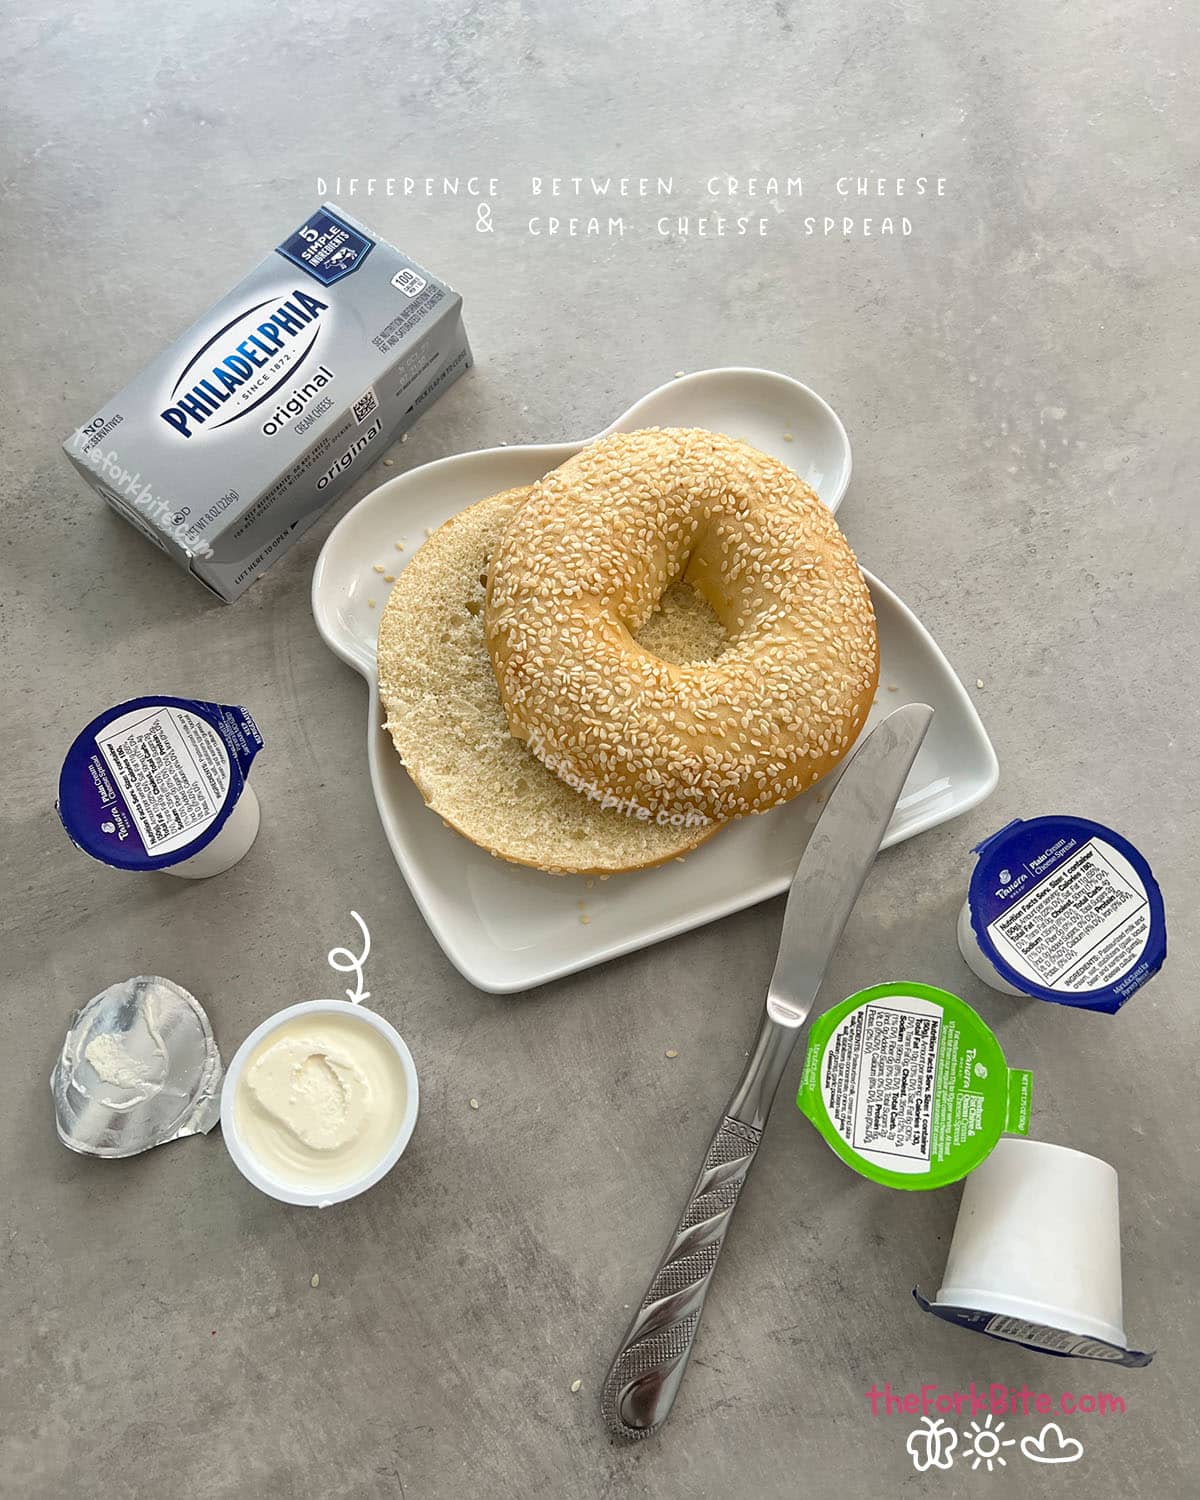 There are many different types of cream cheese on the market, and it can be confusing to know which one to choose. Cream cheese is also a subject of debate regarding spreadability.